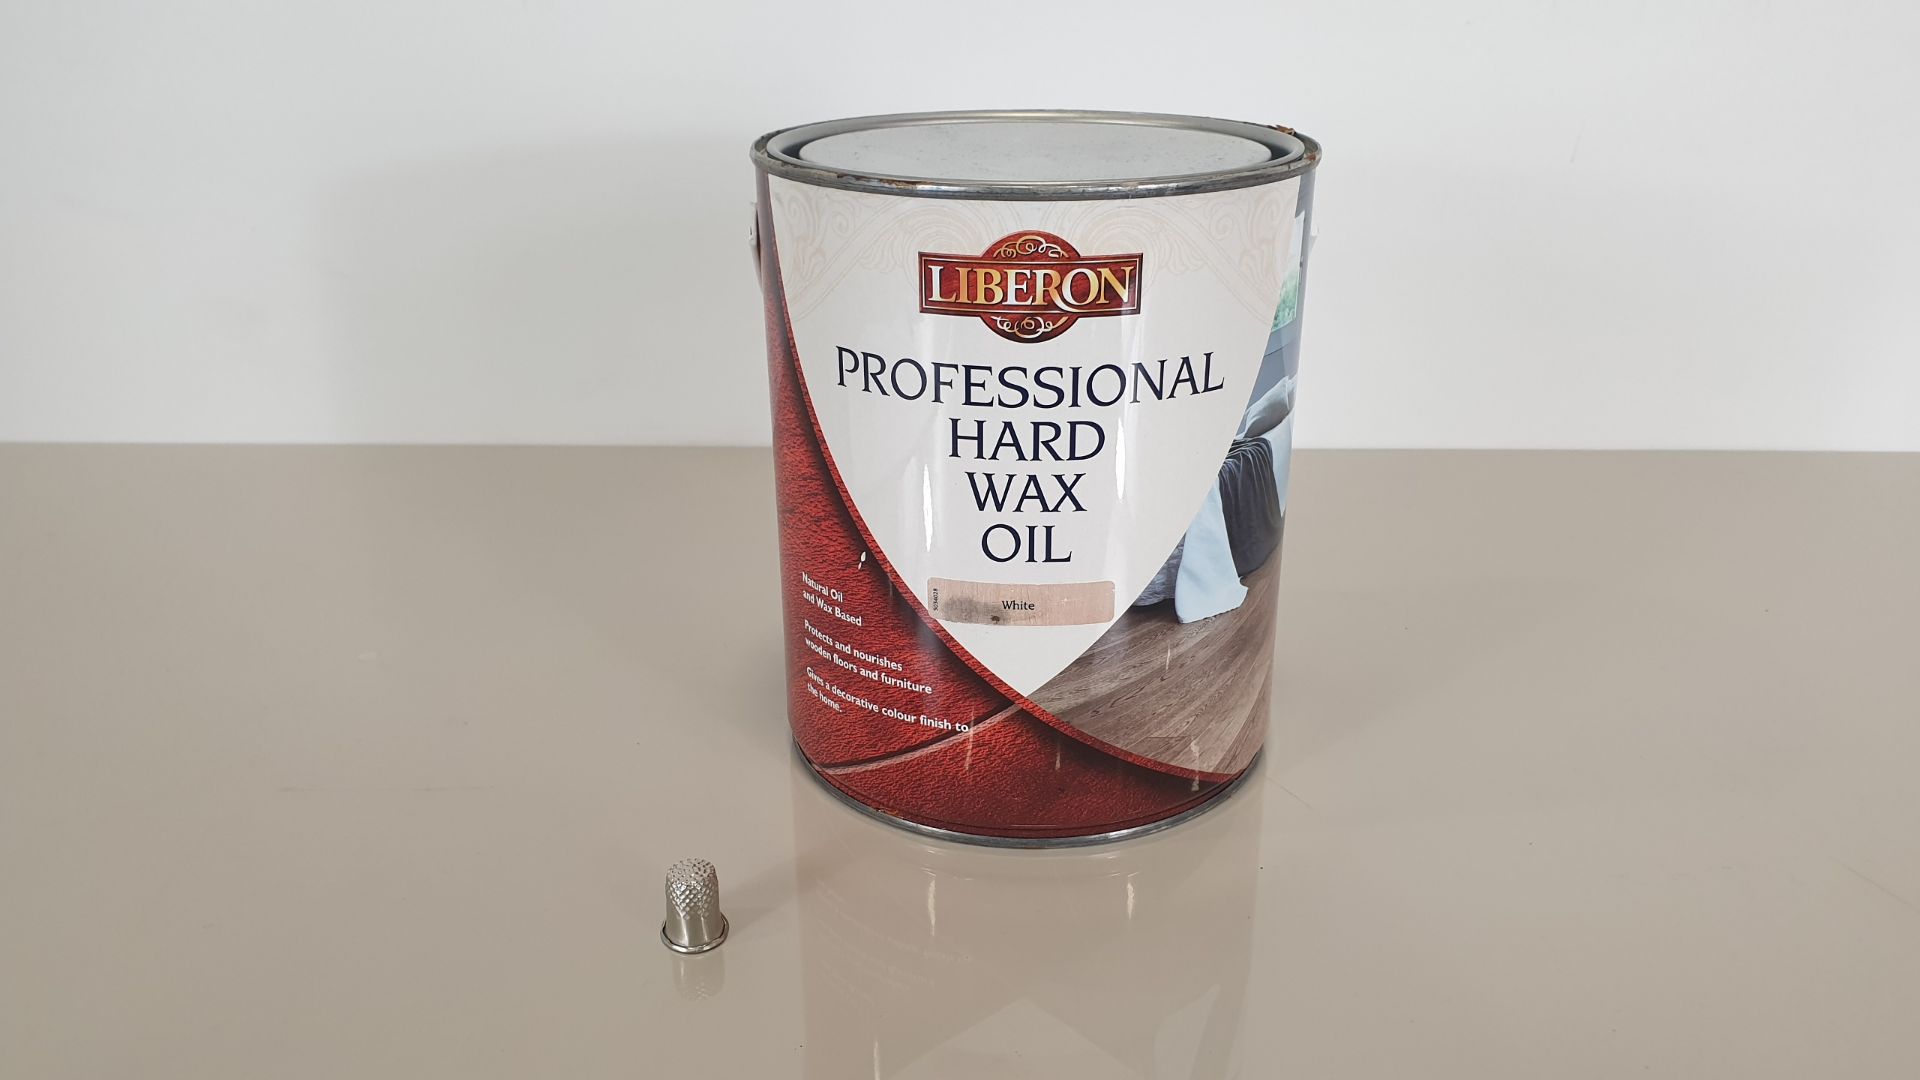 (LOT FOR THURSDAY 28TH MAY AUCTION) 10 X LIBERON 2.5 LITRE PROFESSIONAL HARD WAX OIL - WHITE